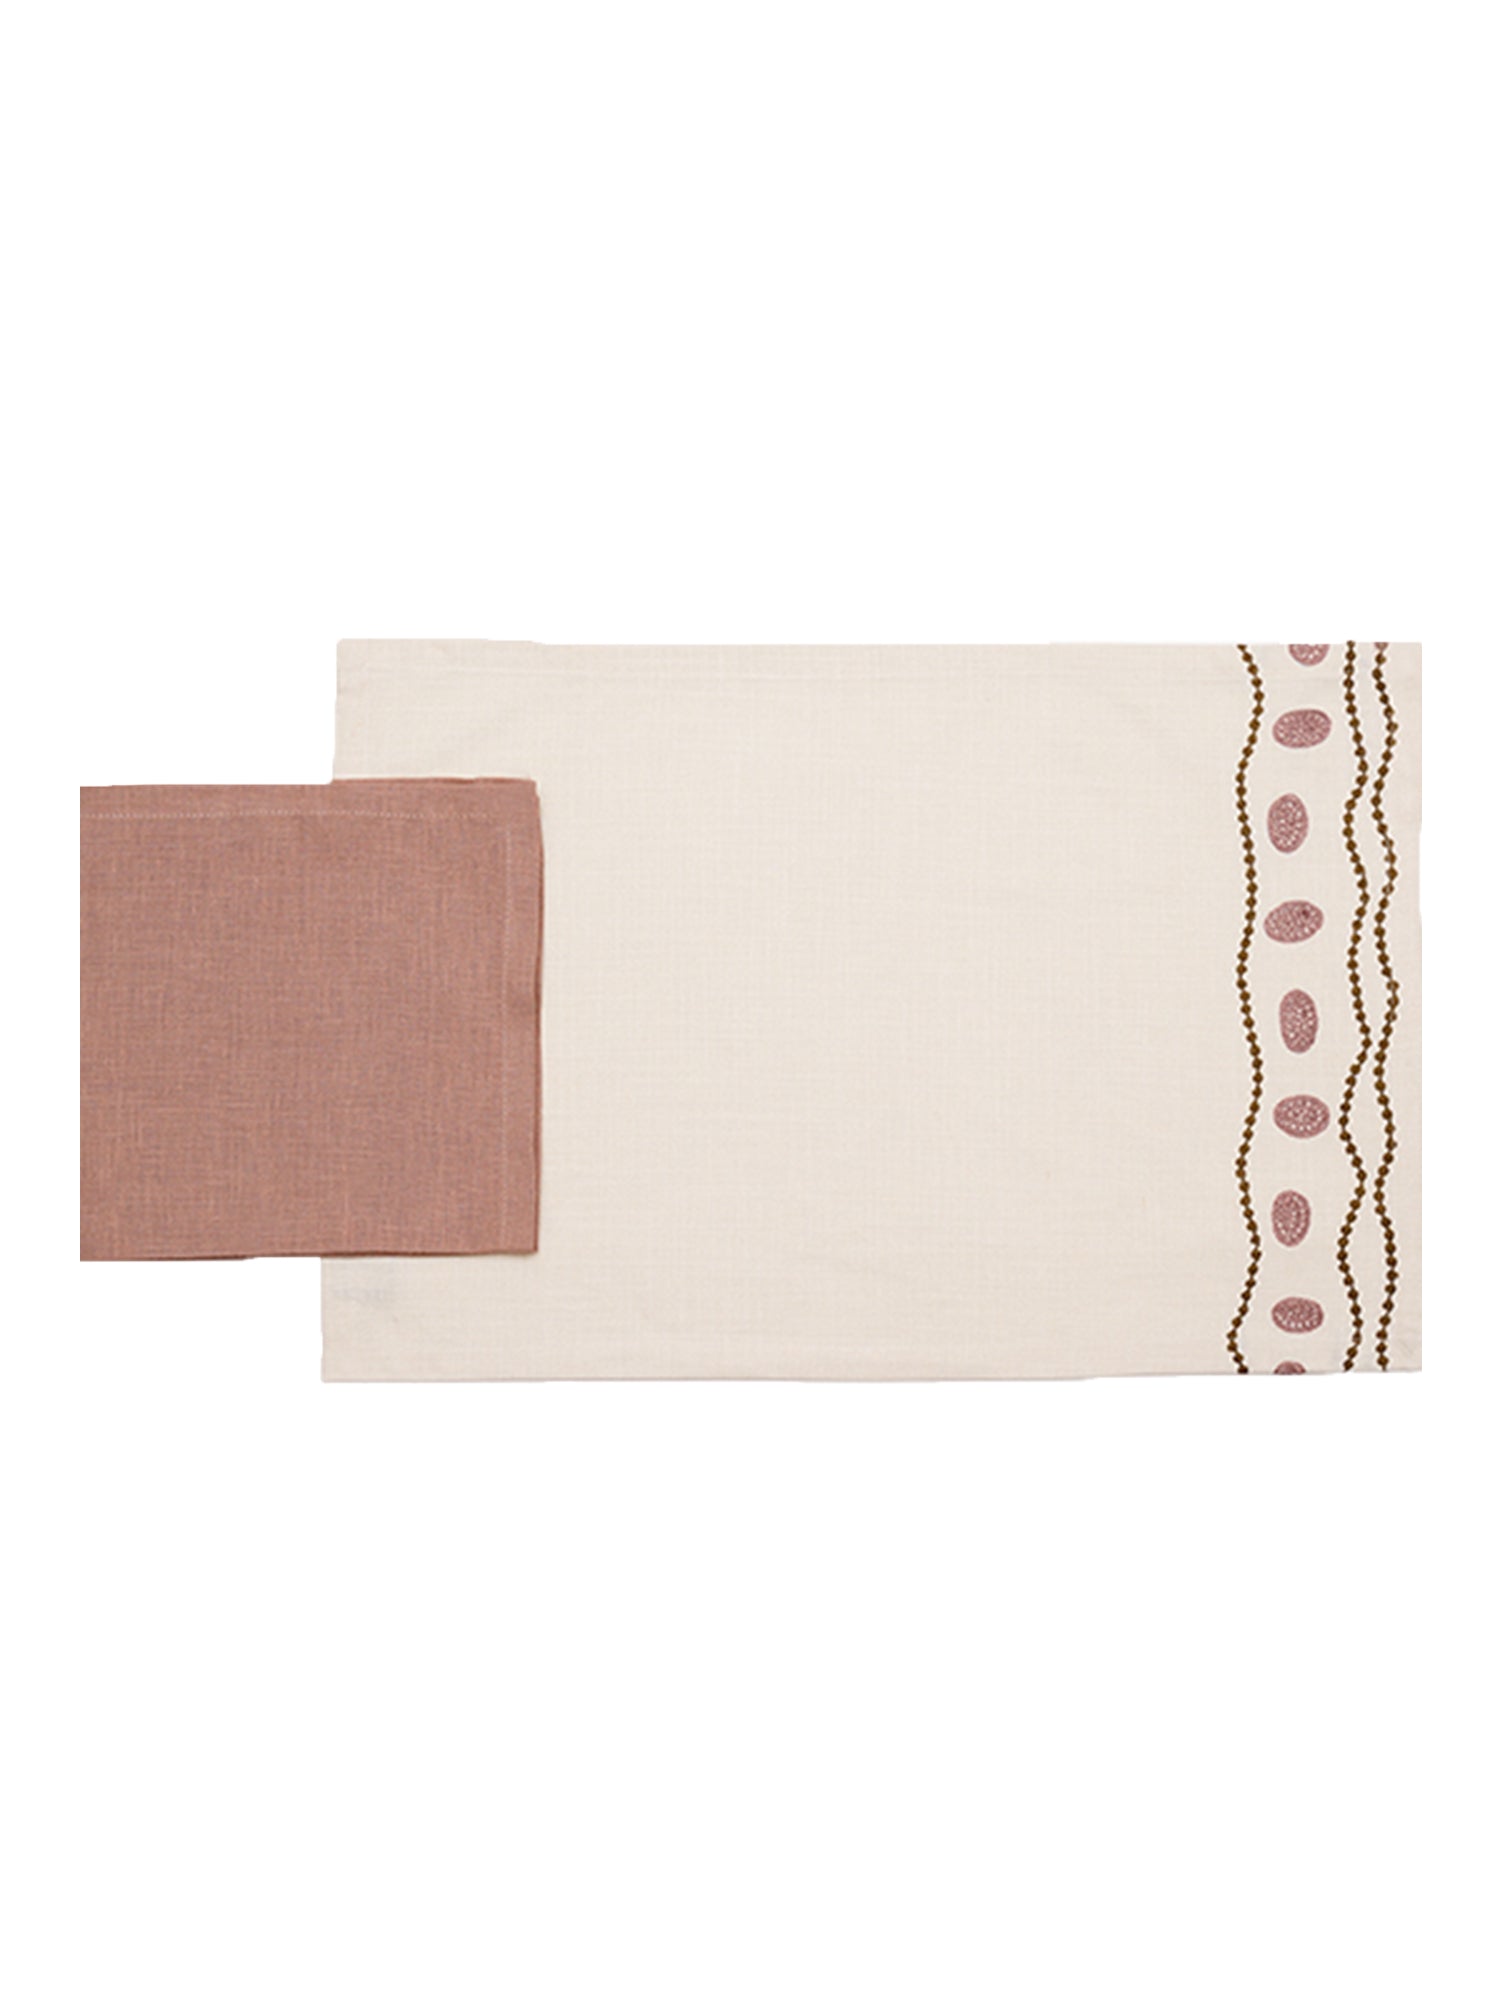 cotton embroidered placemats with napkin set in offwhite and coral color - 13x19 inch